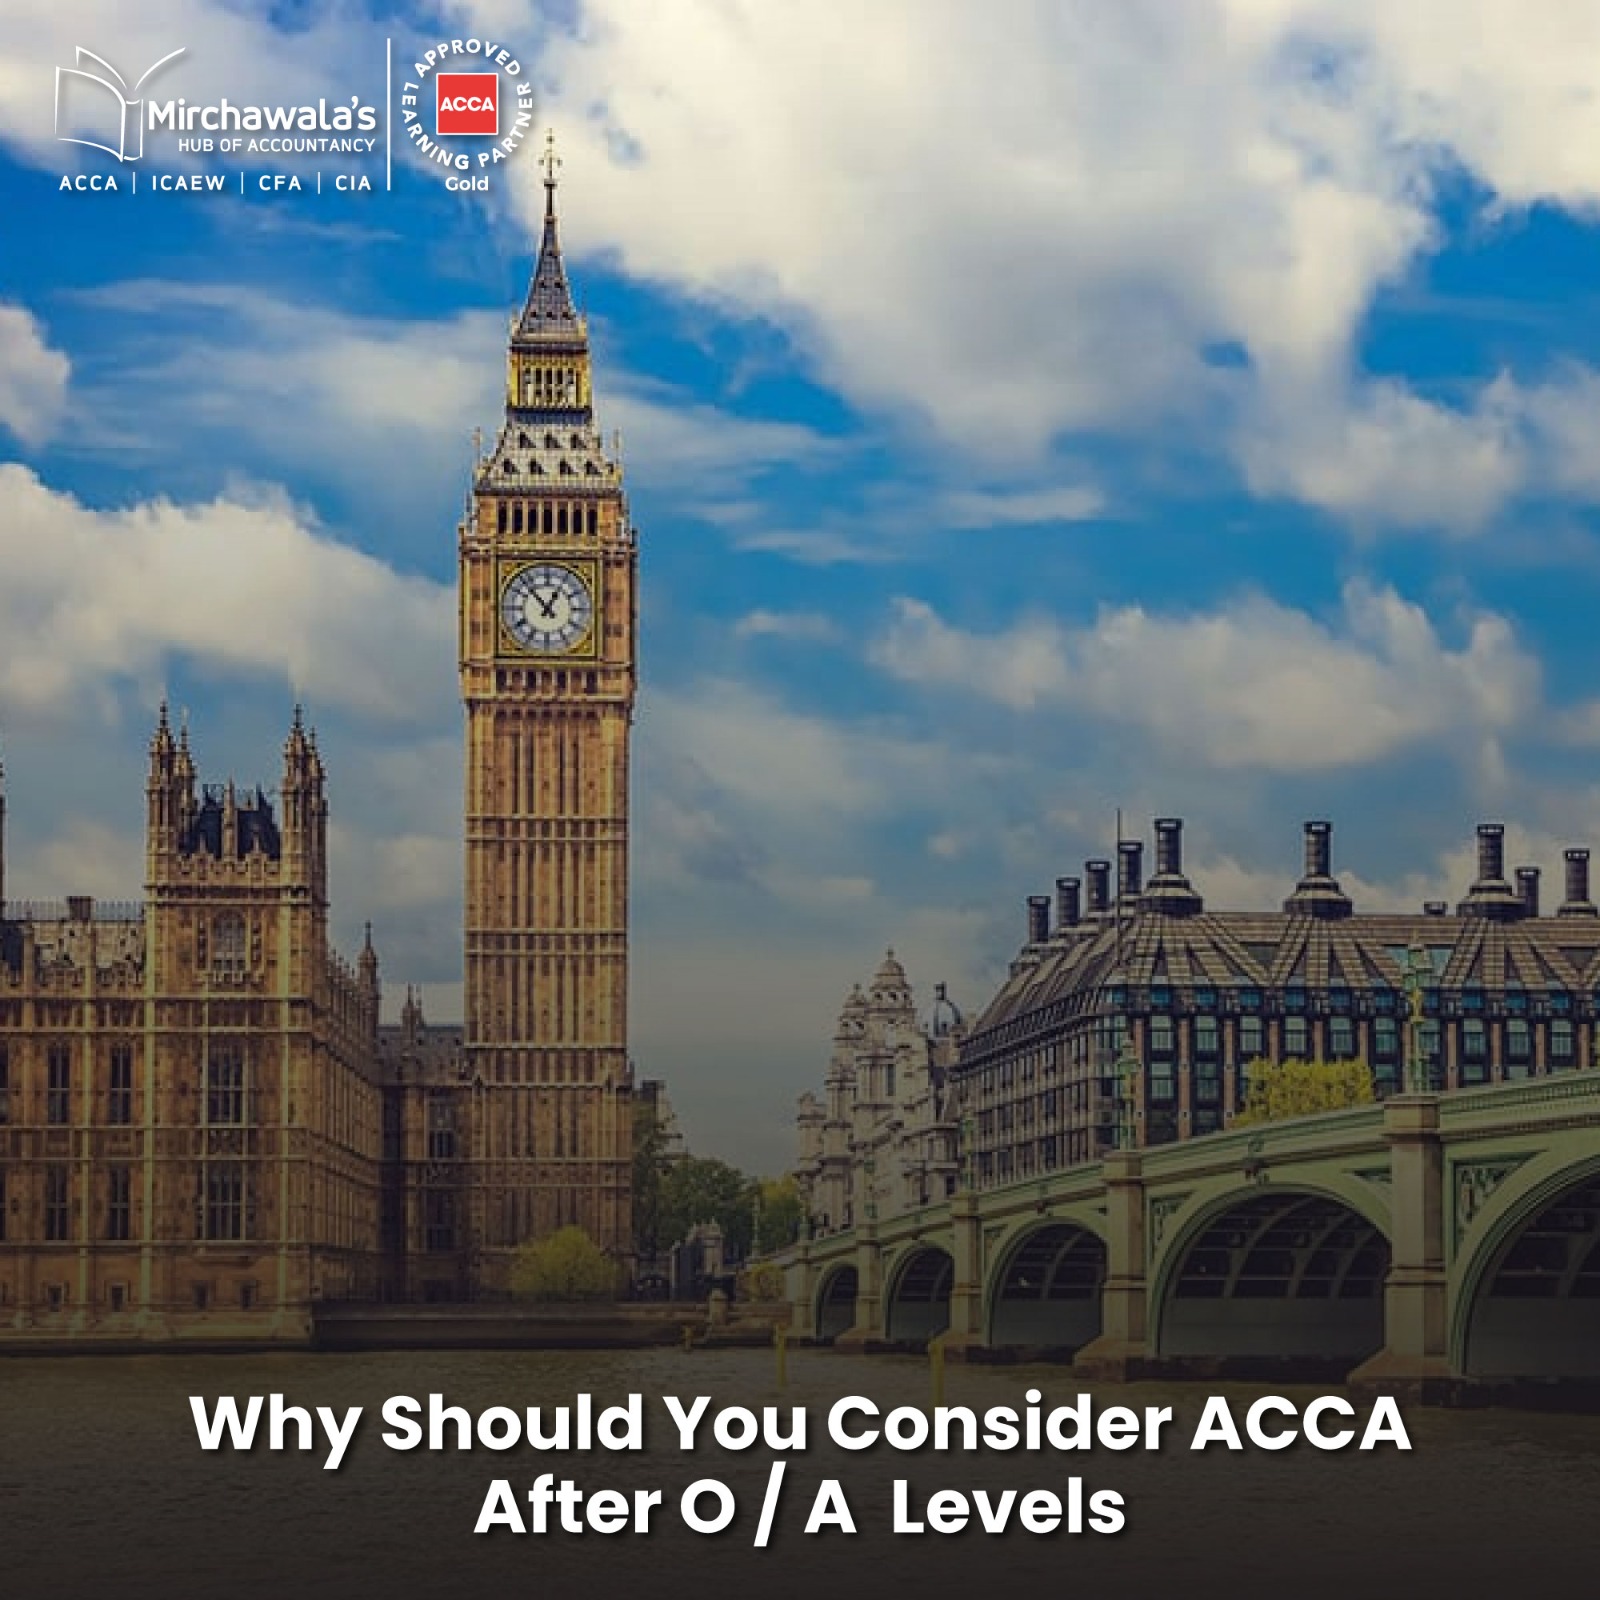 Why Should You Consider ACCA After A or O Level?